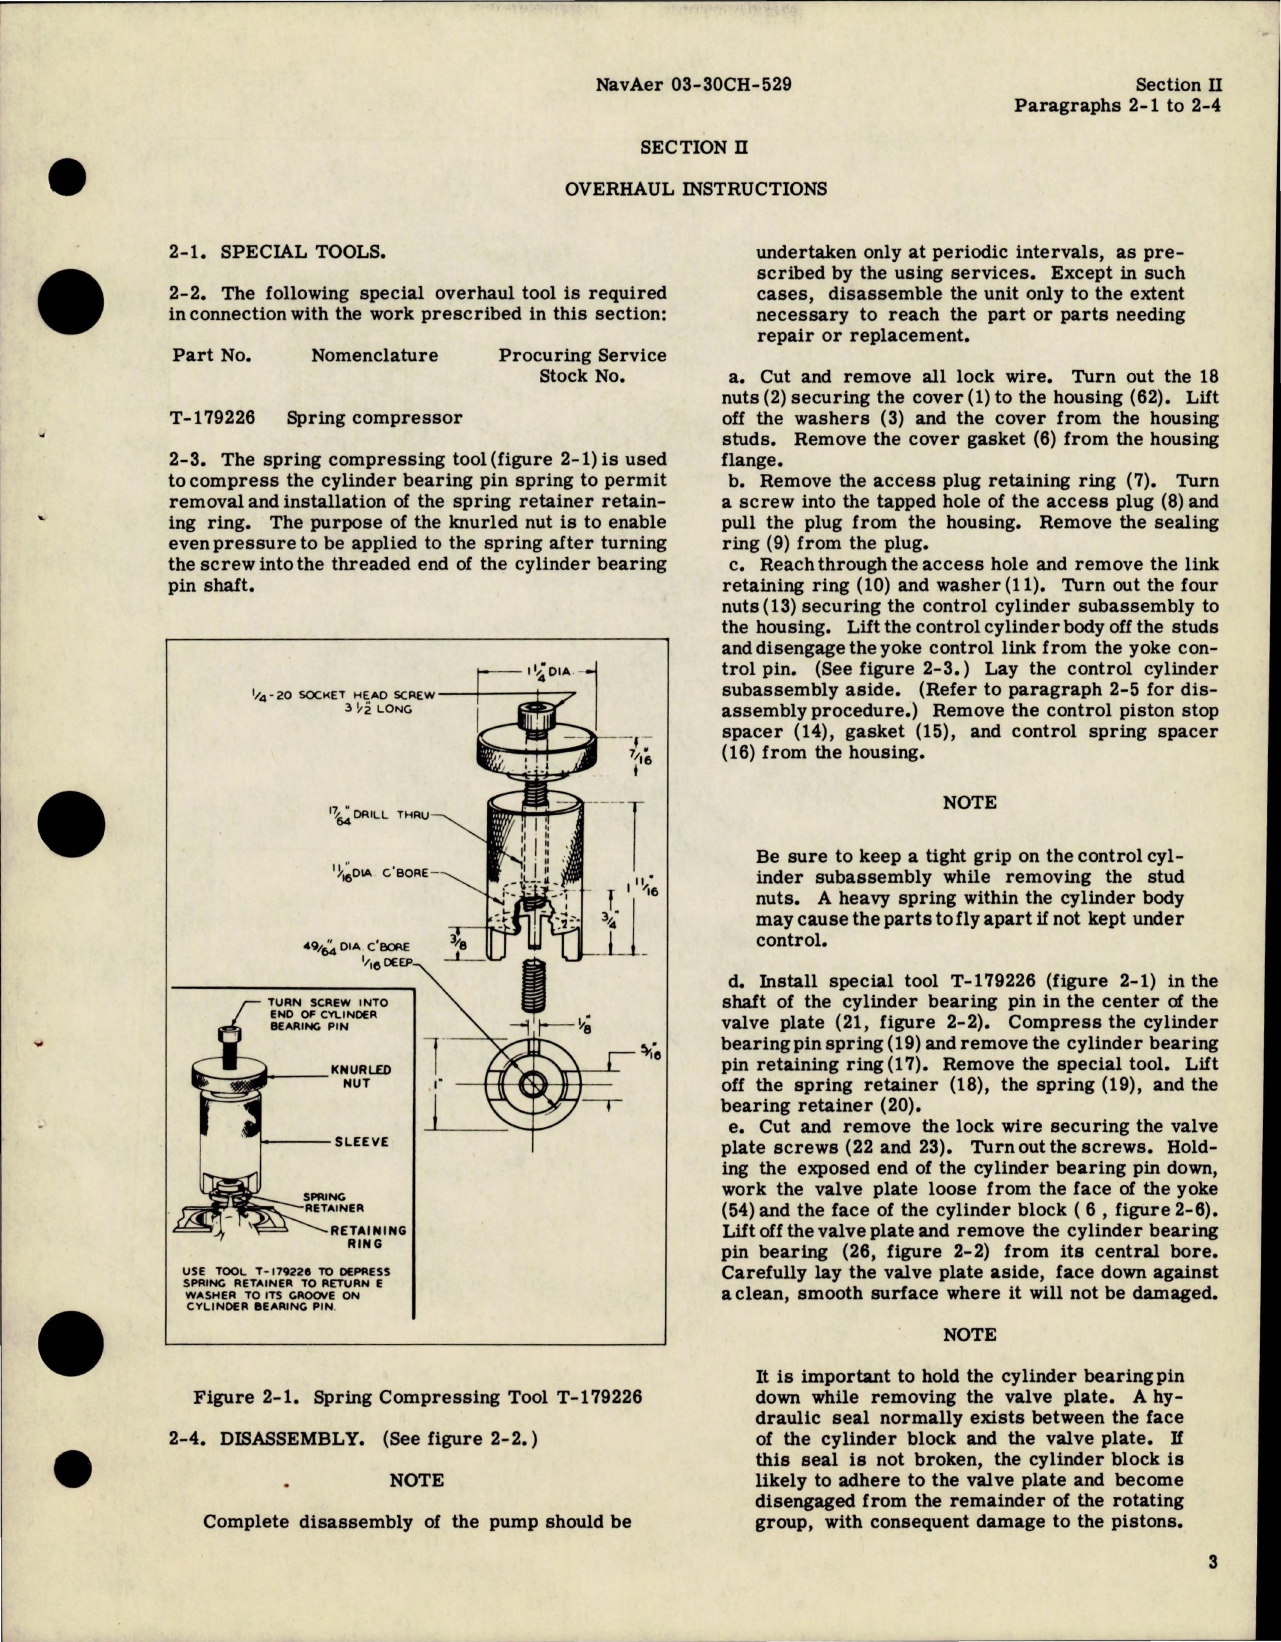 Sample page 7 from AirCorps Library document: Overhaul Instructions for Variable Displacement Hydraulic Pump - Model AA-35005 